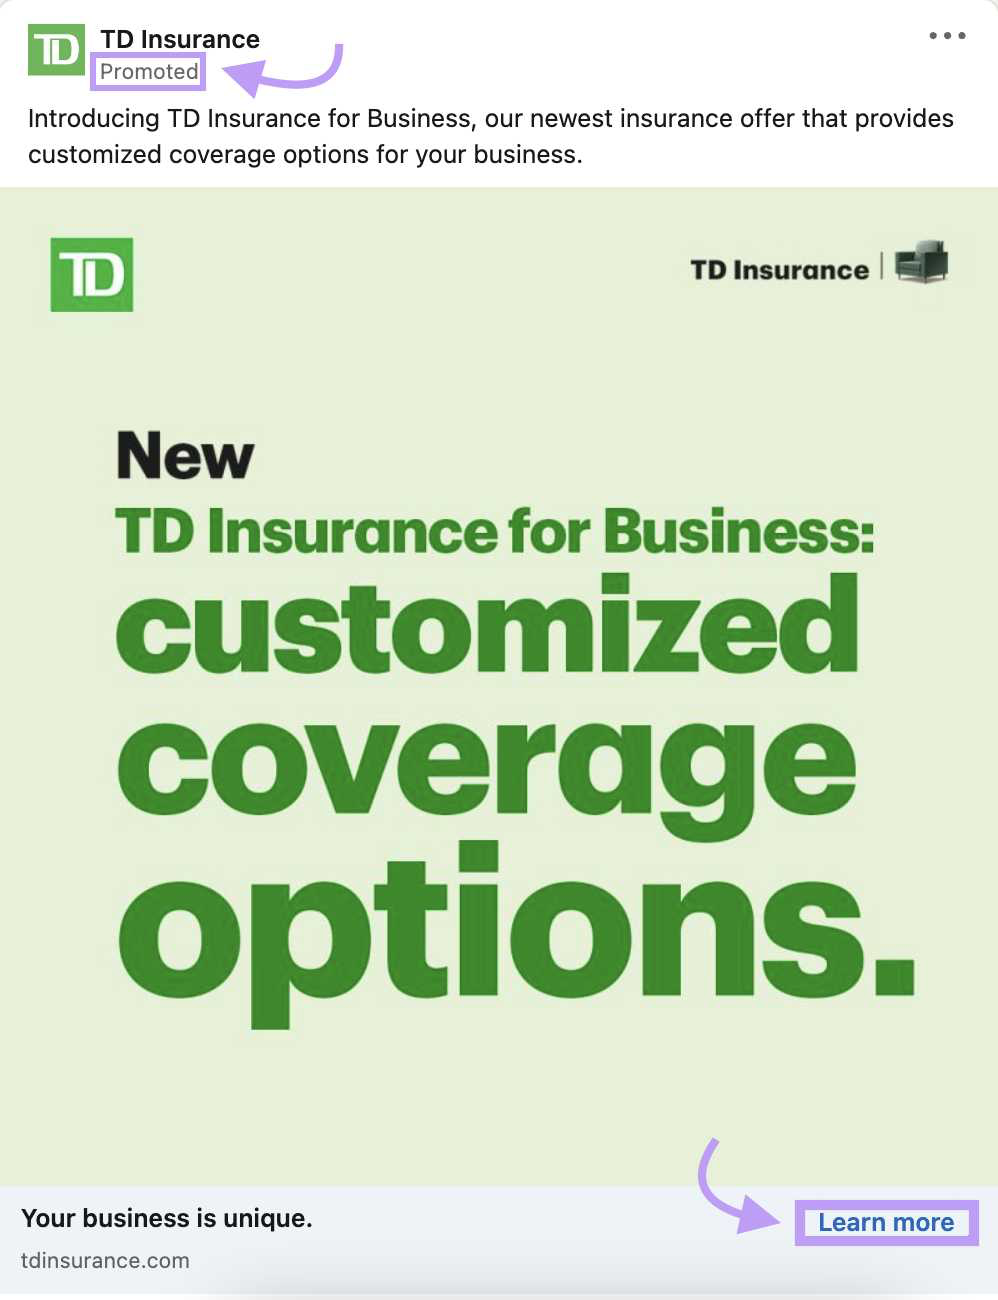 An representation  advertisement  connected  LinkedIn by Toronto Dominion (TD)